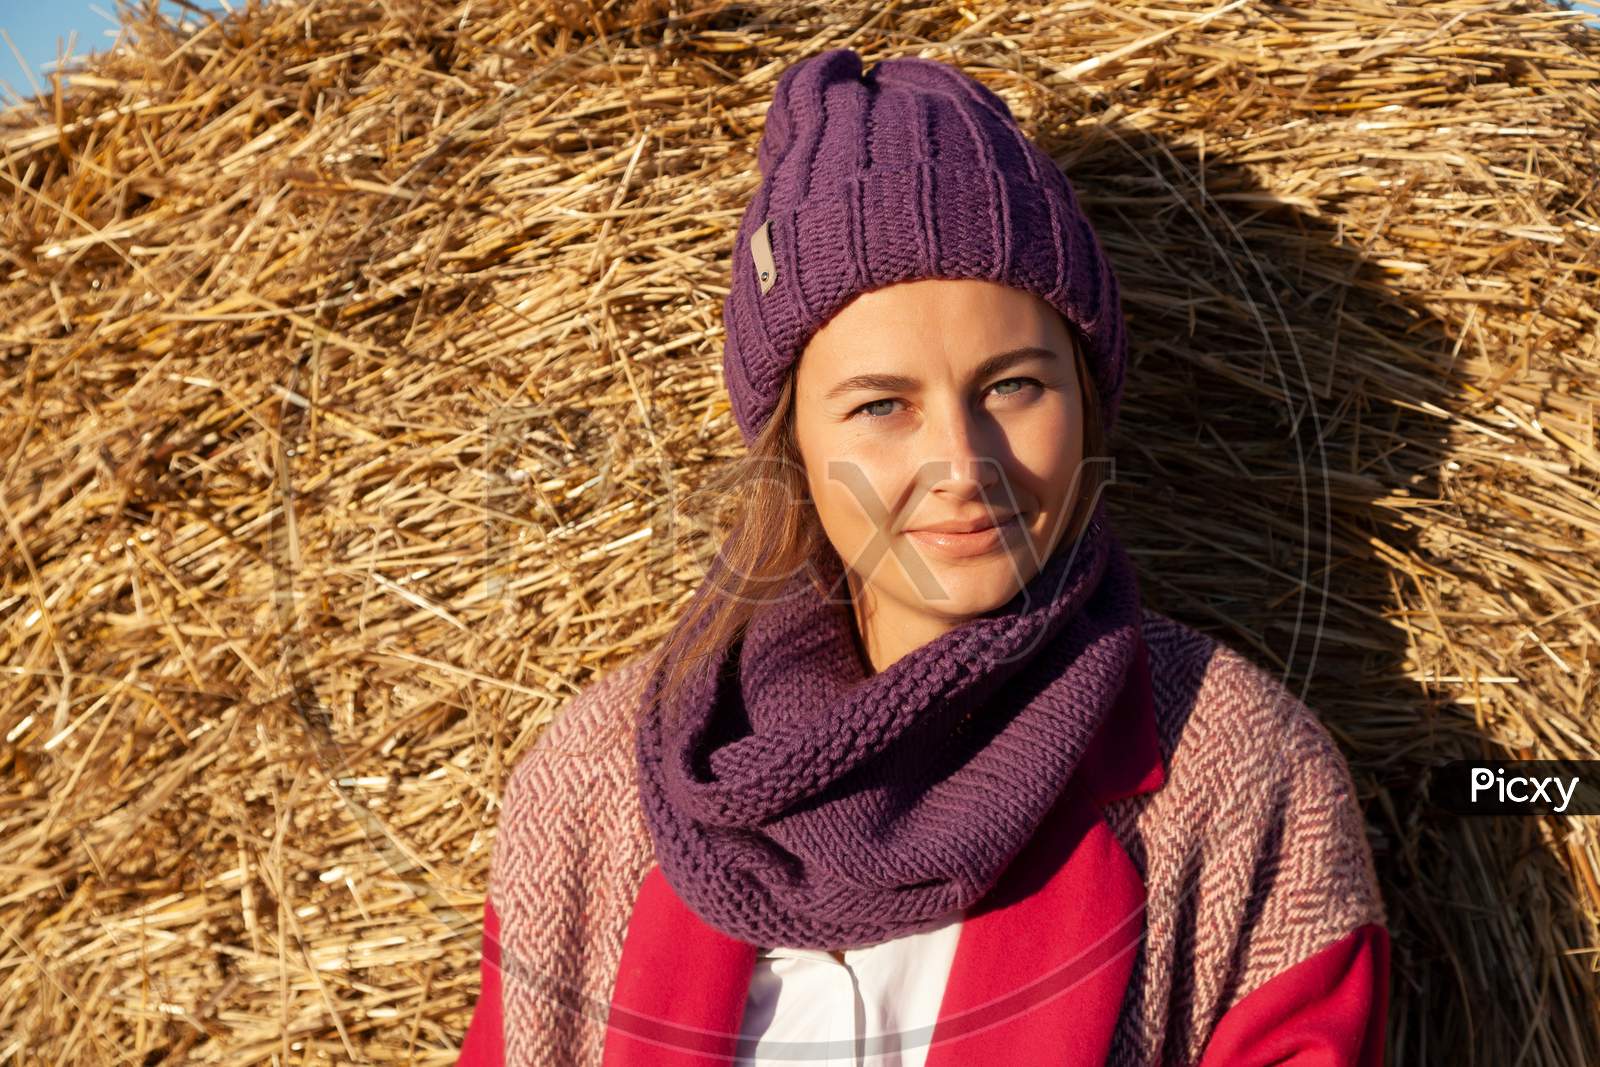 Portrait Of A Beautiful Young Model In Knitted Hat  And Warm Clothes Enjoy Day, On Background Field In  Sunny Autumn Day . Autumn Warm Photo. Woman Smiling And Look Away, Joyful Cheerful Mood.